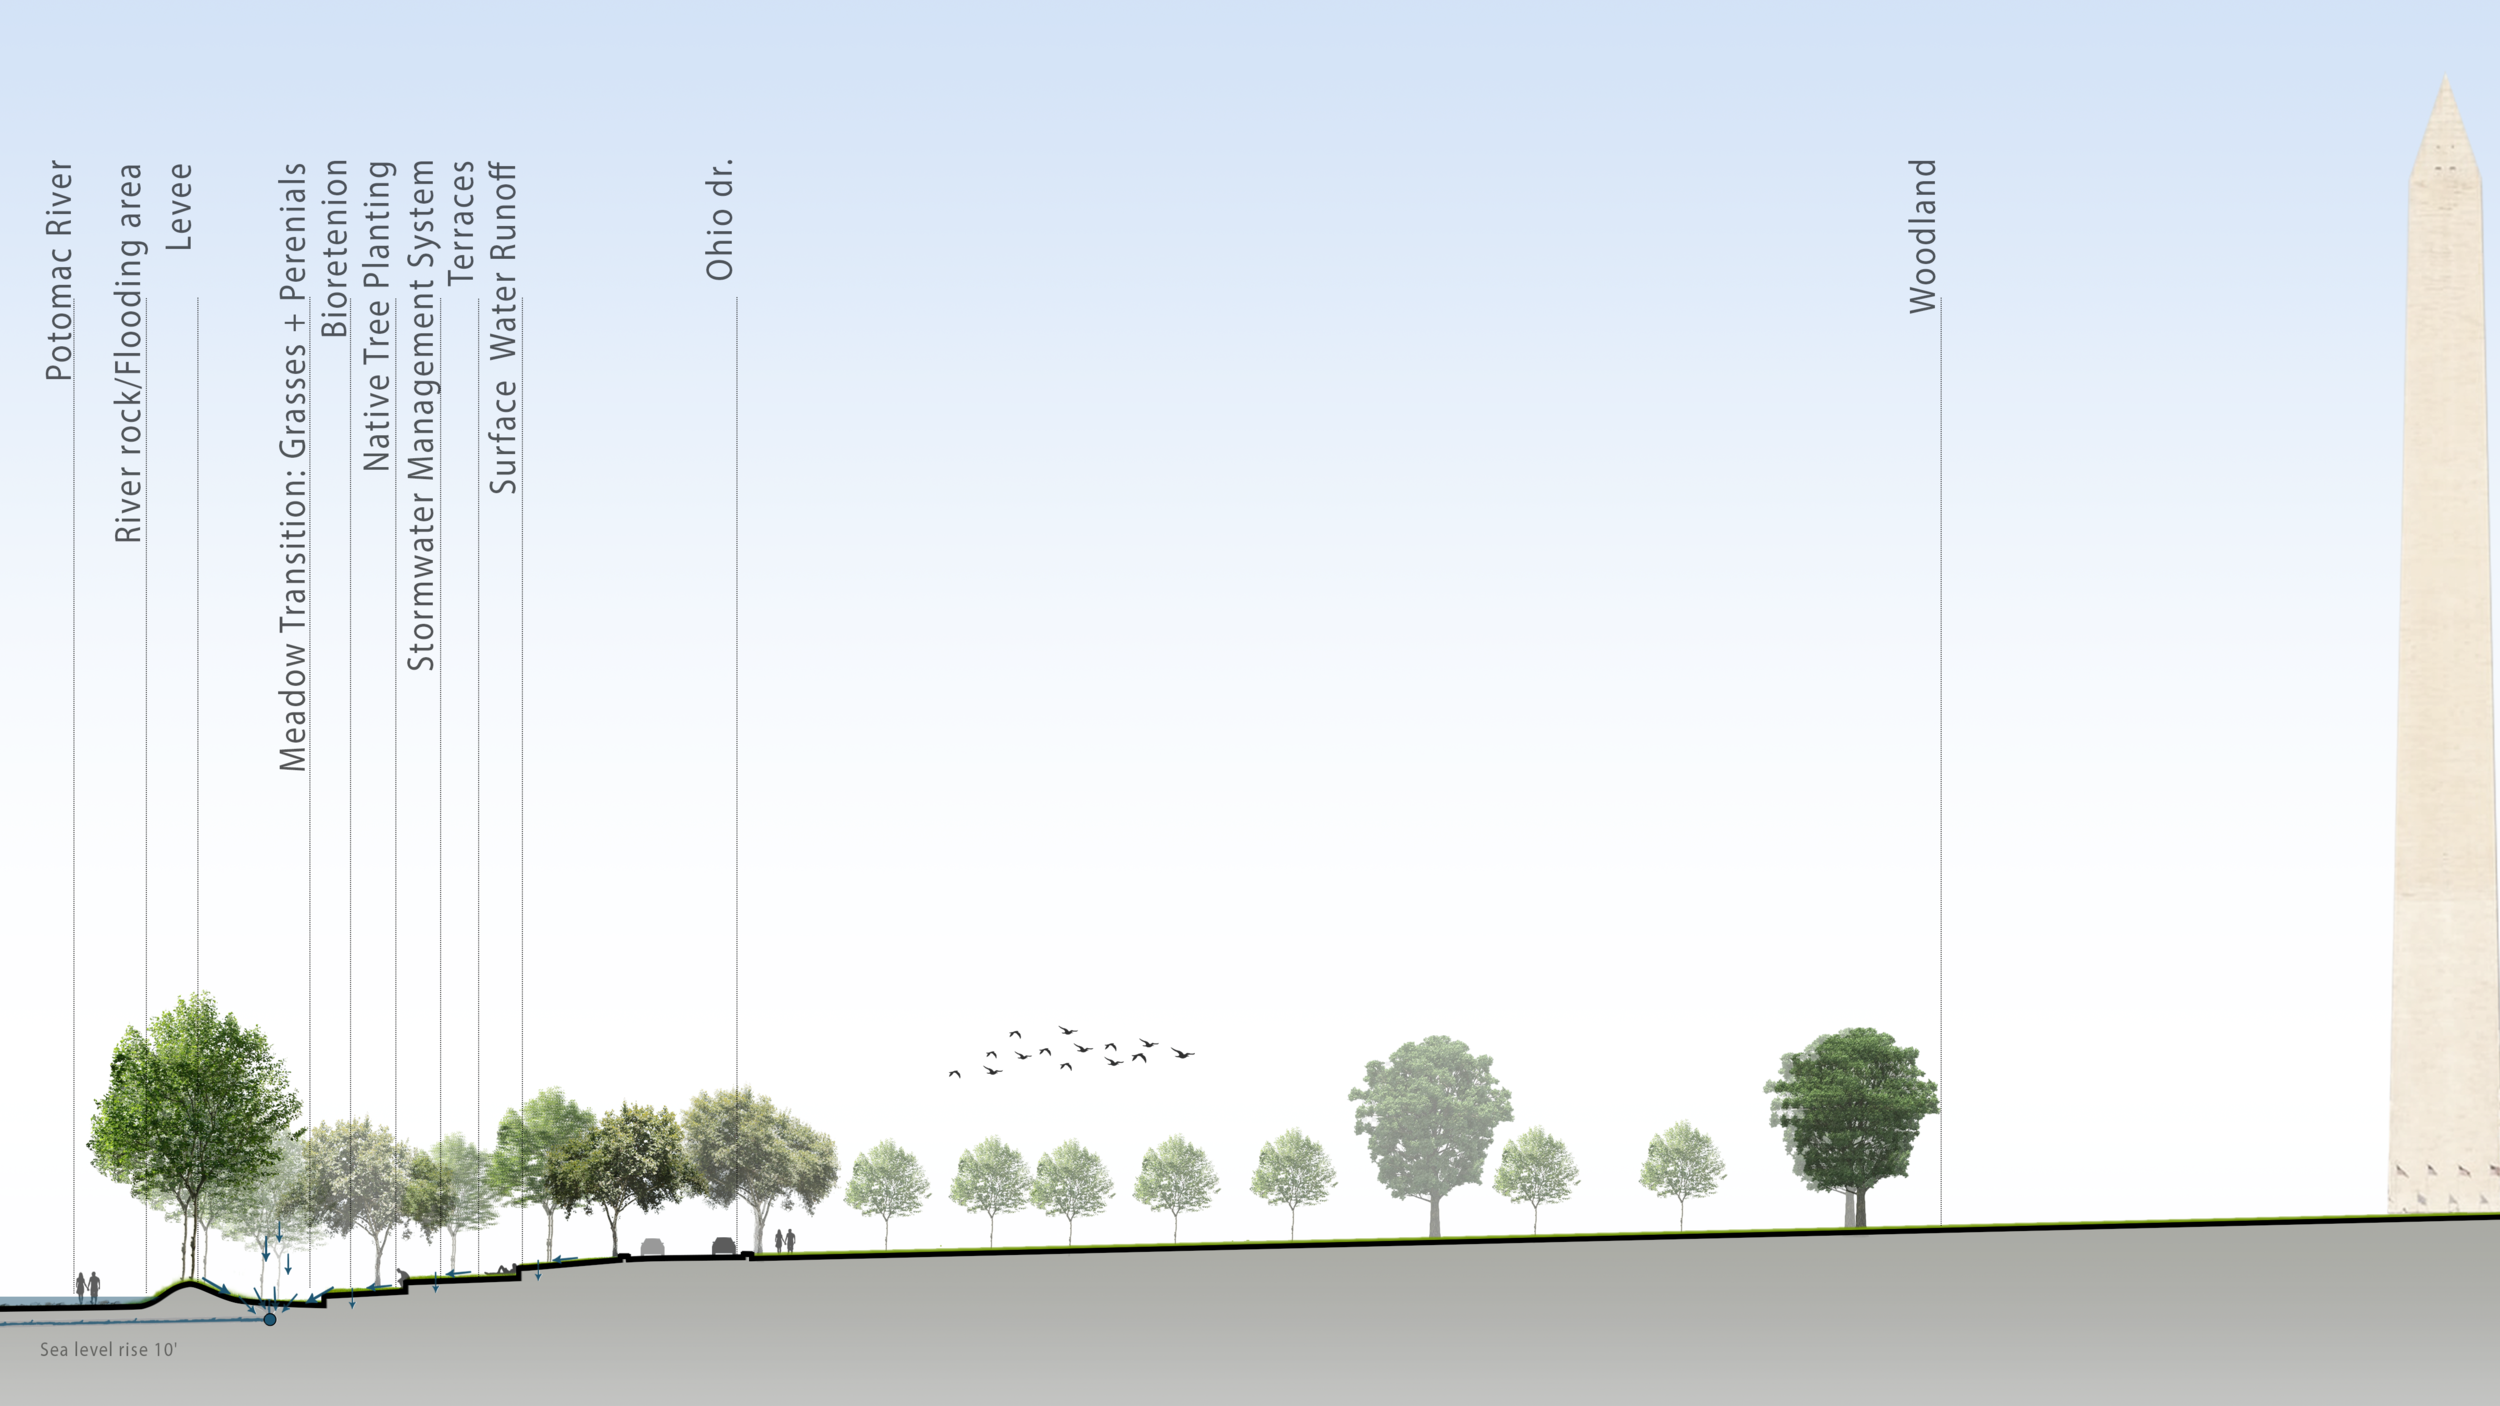  Terraced land, a levee. and other interventions allow space by the water to be habitable 